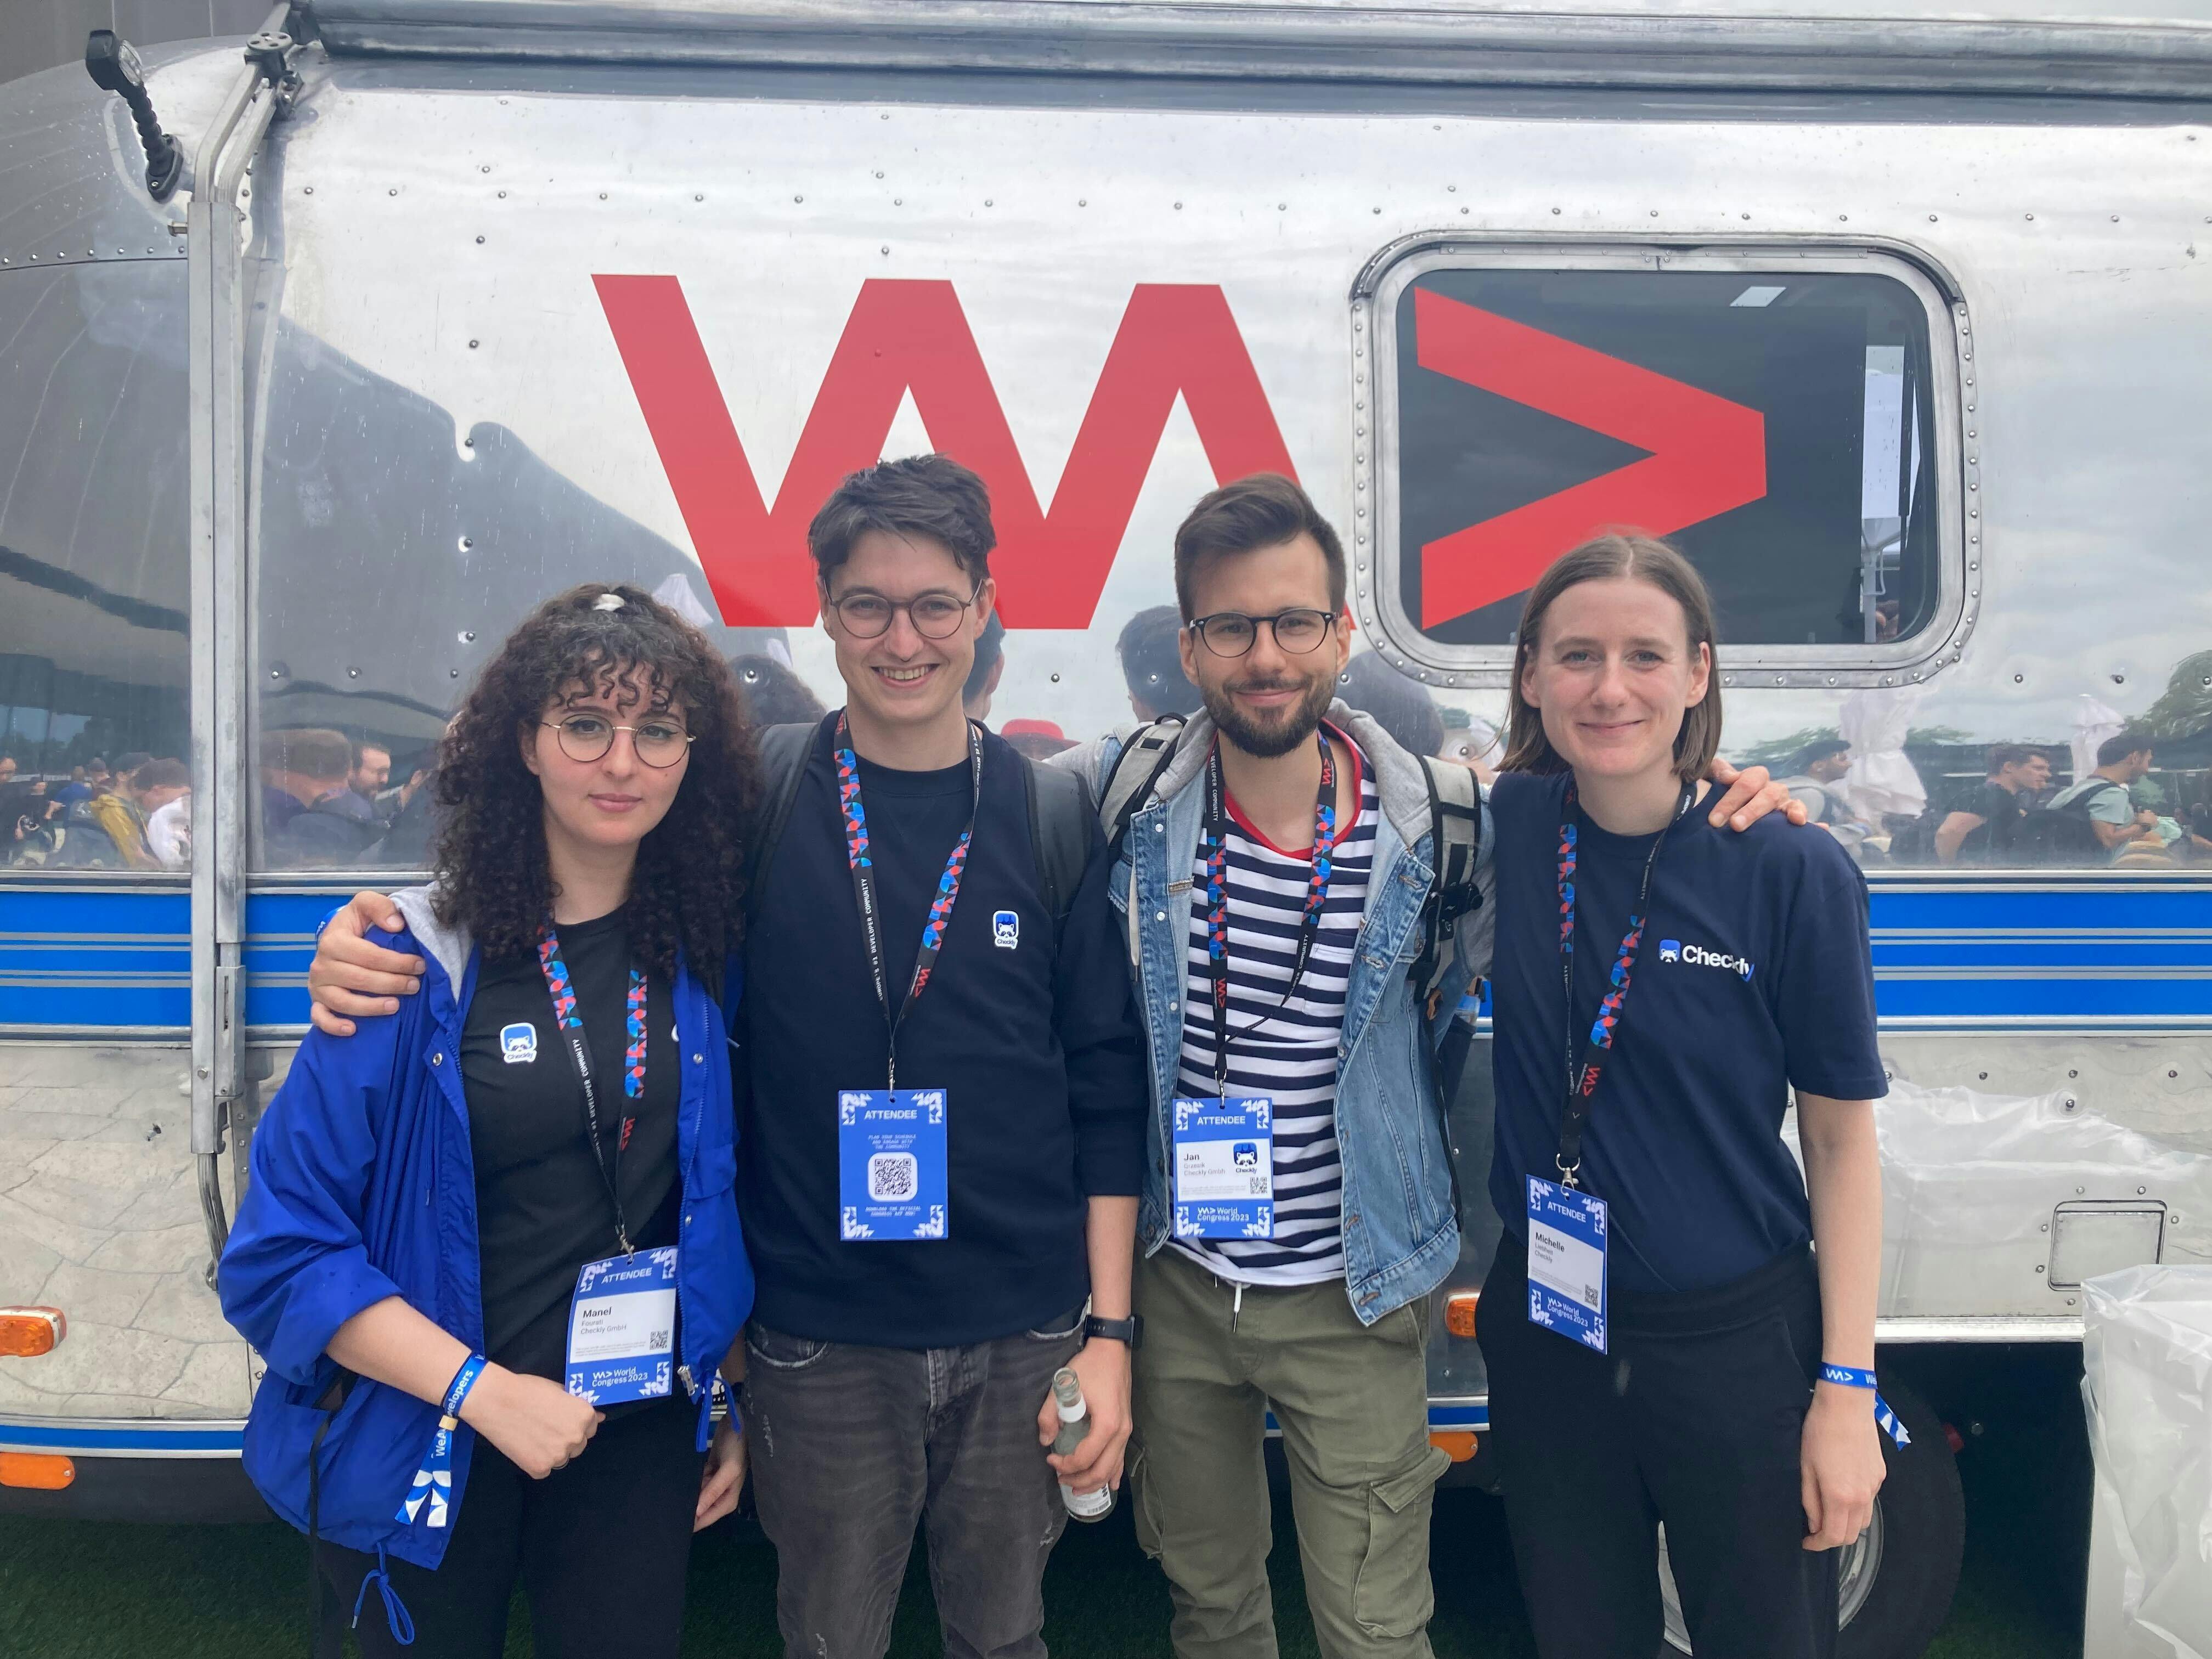 Photo of 4 Checkly team members at the WeAreDevelopers conference in Berlin